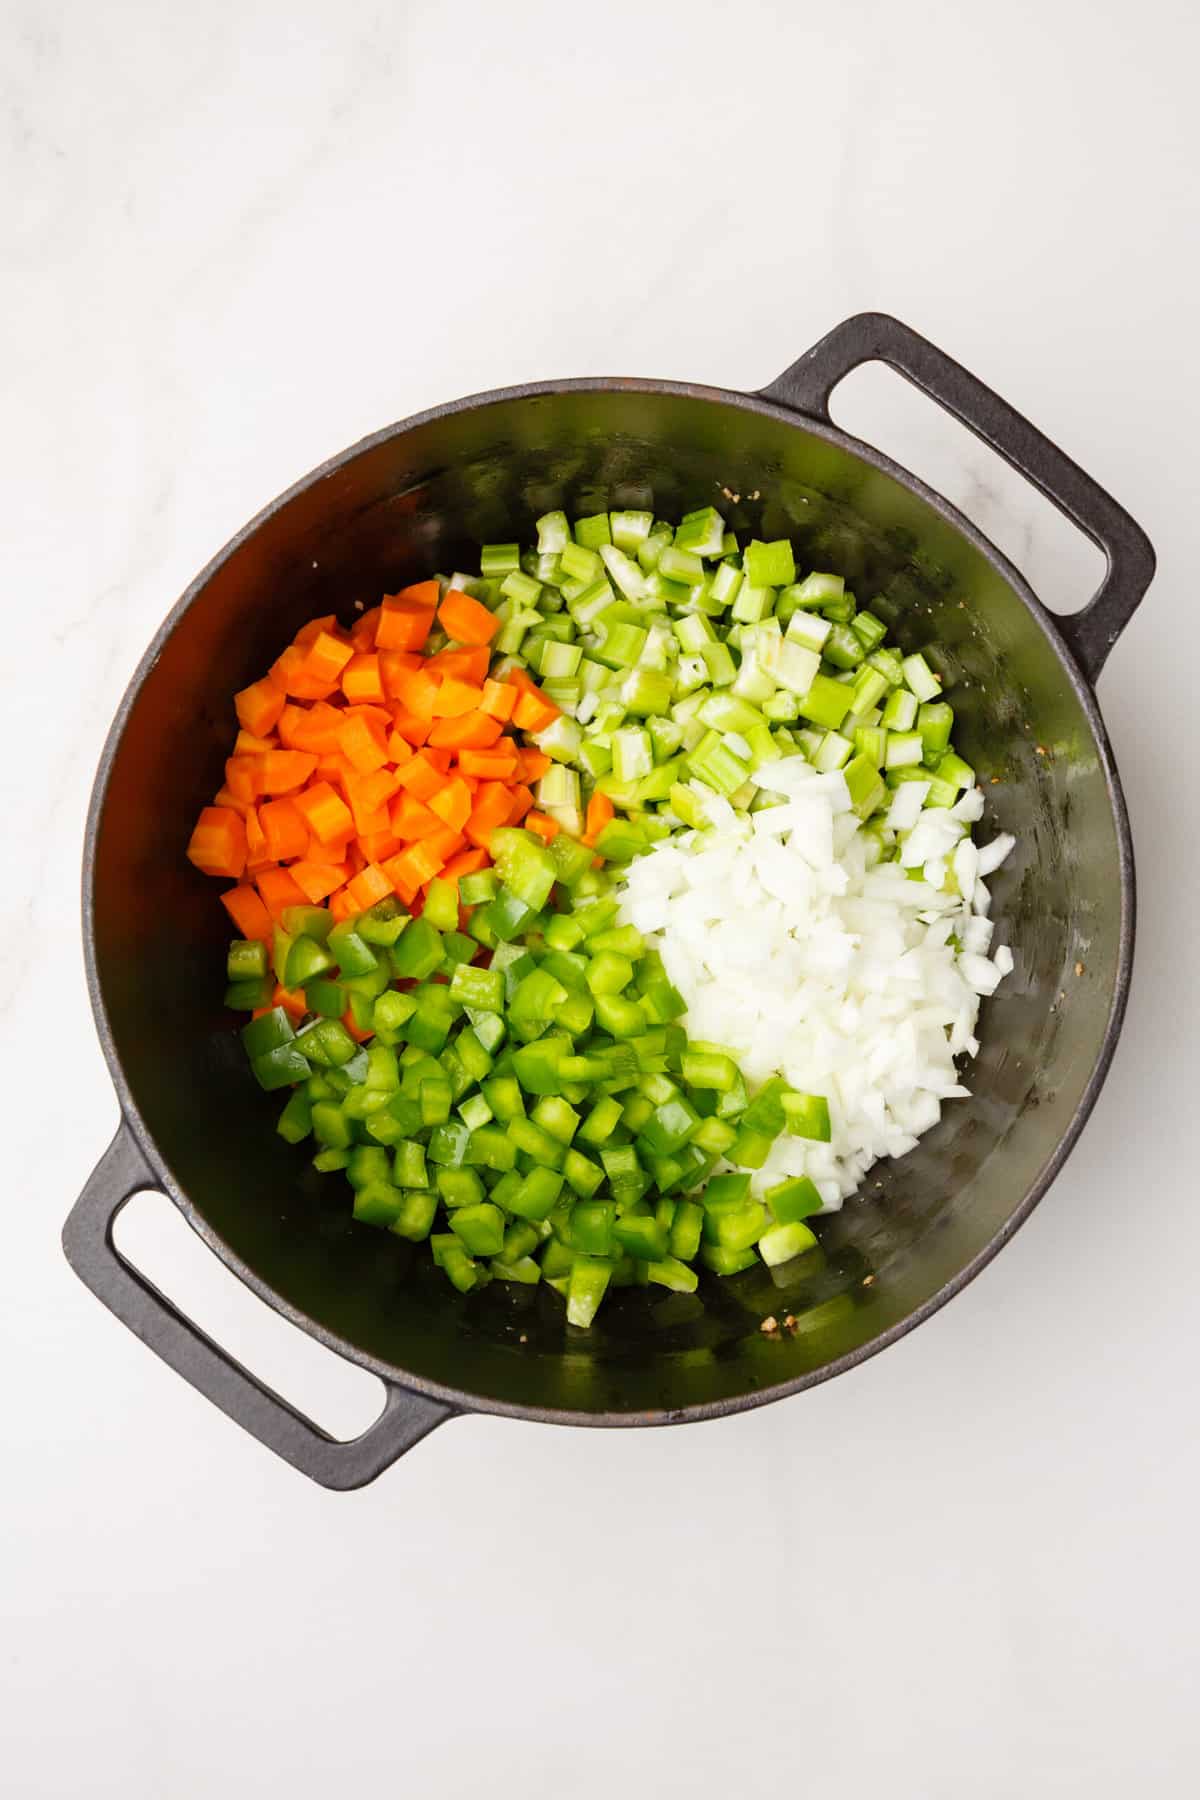 dutch oven with cooked chopped carrots, celery, green bell peppers, white onions